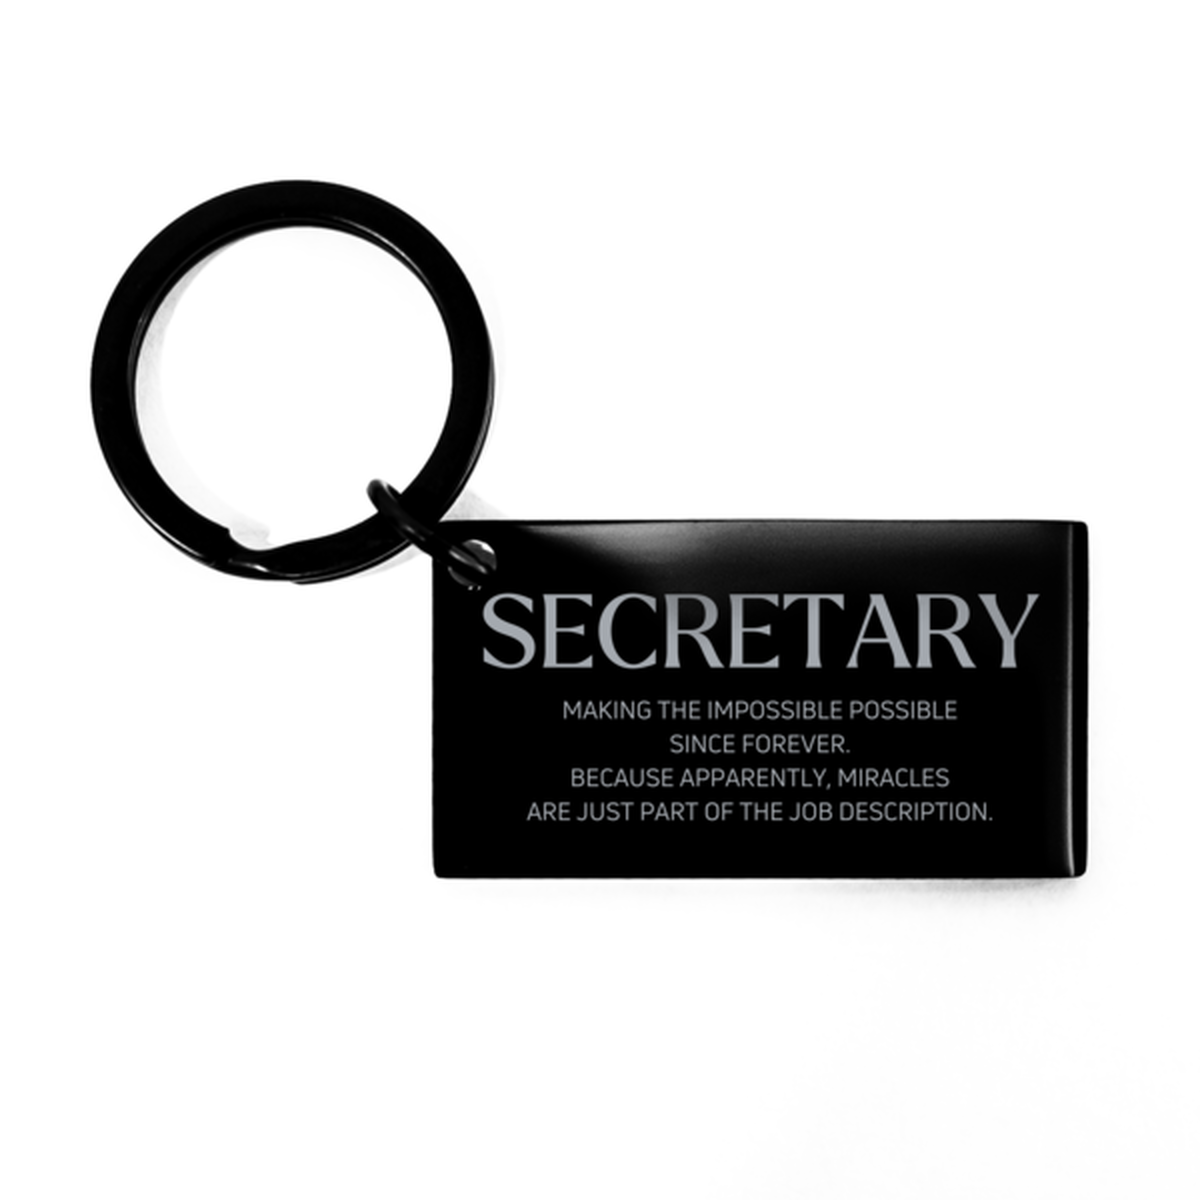 Funny Secretary Gifts, Miracles are just part of the job description, Inspirational Birthday Keychain For Secretary, Men, Women, Coworkers, Friends, Boss